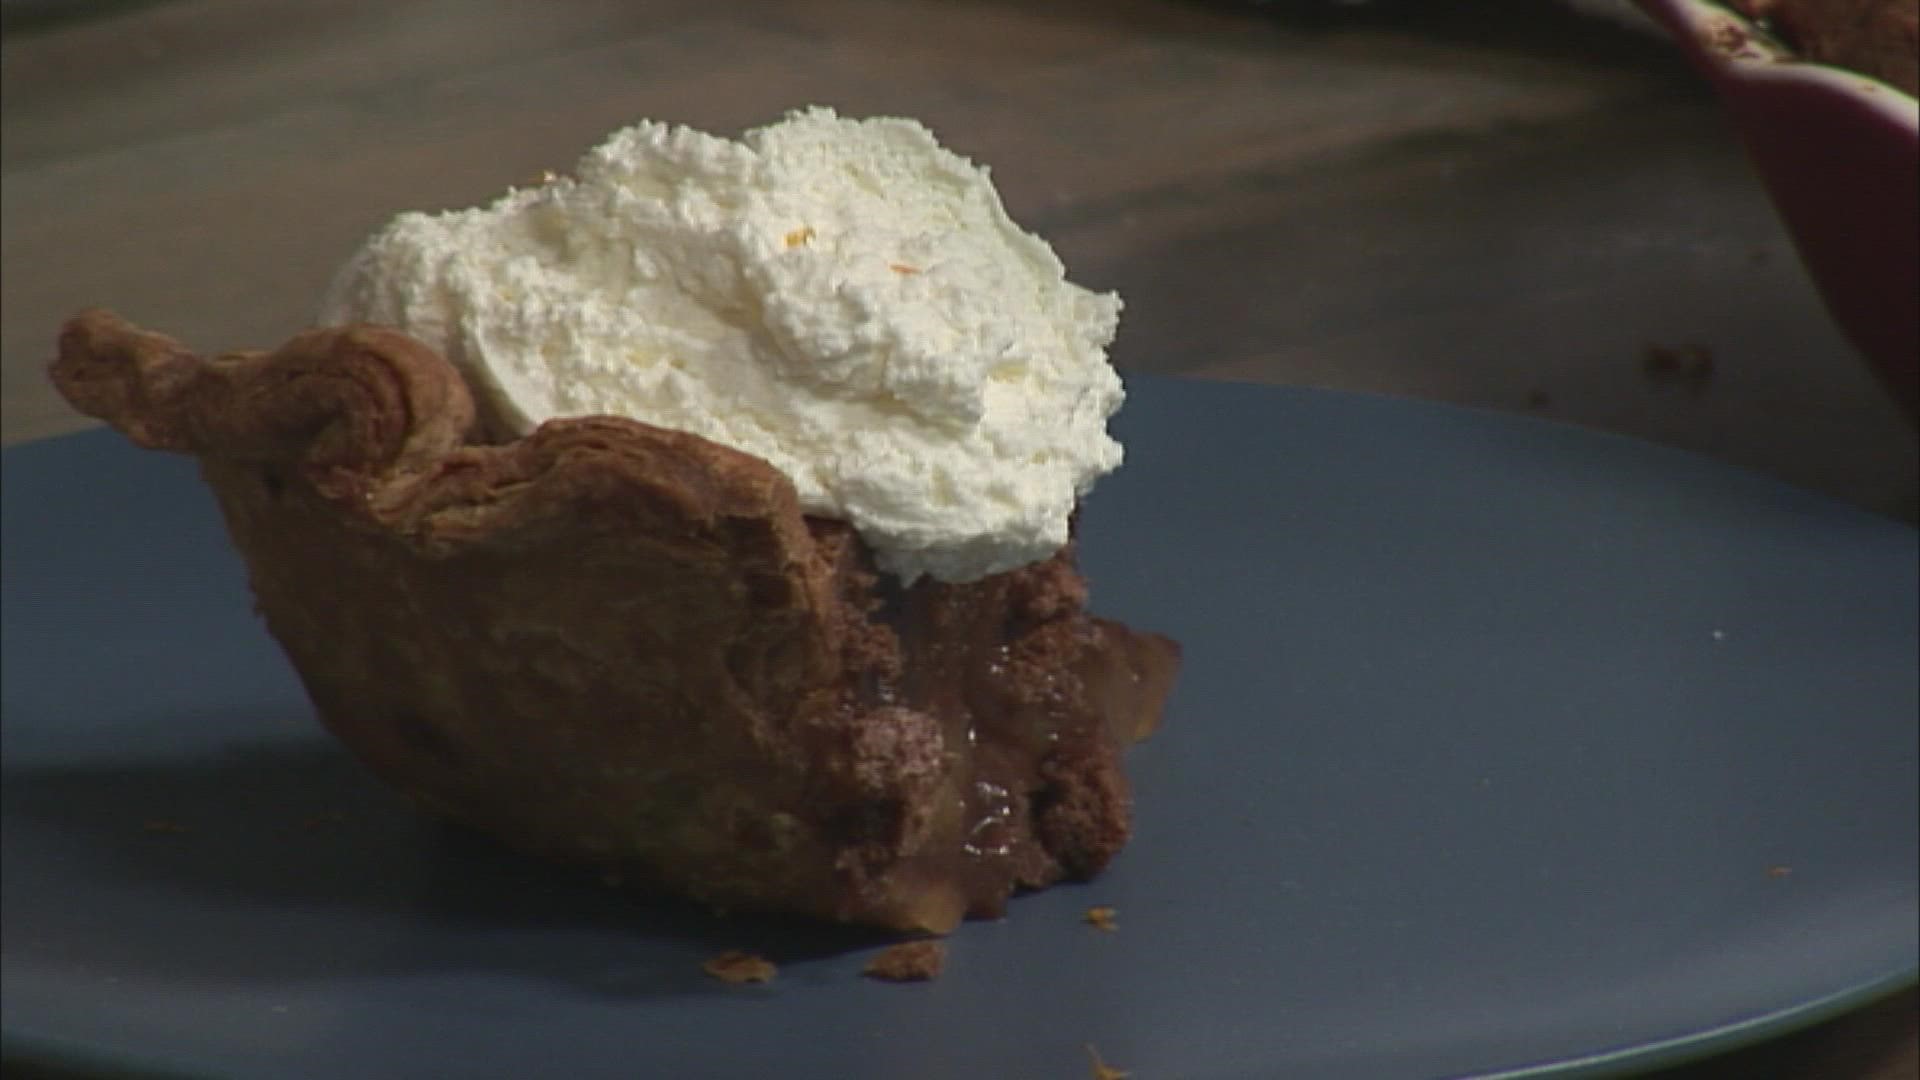 Chef Matt Duley shares a dessert recipe that’s perfect for chocolate lovers